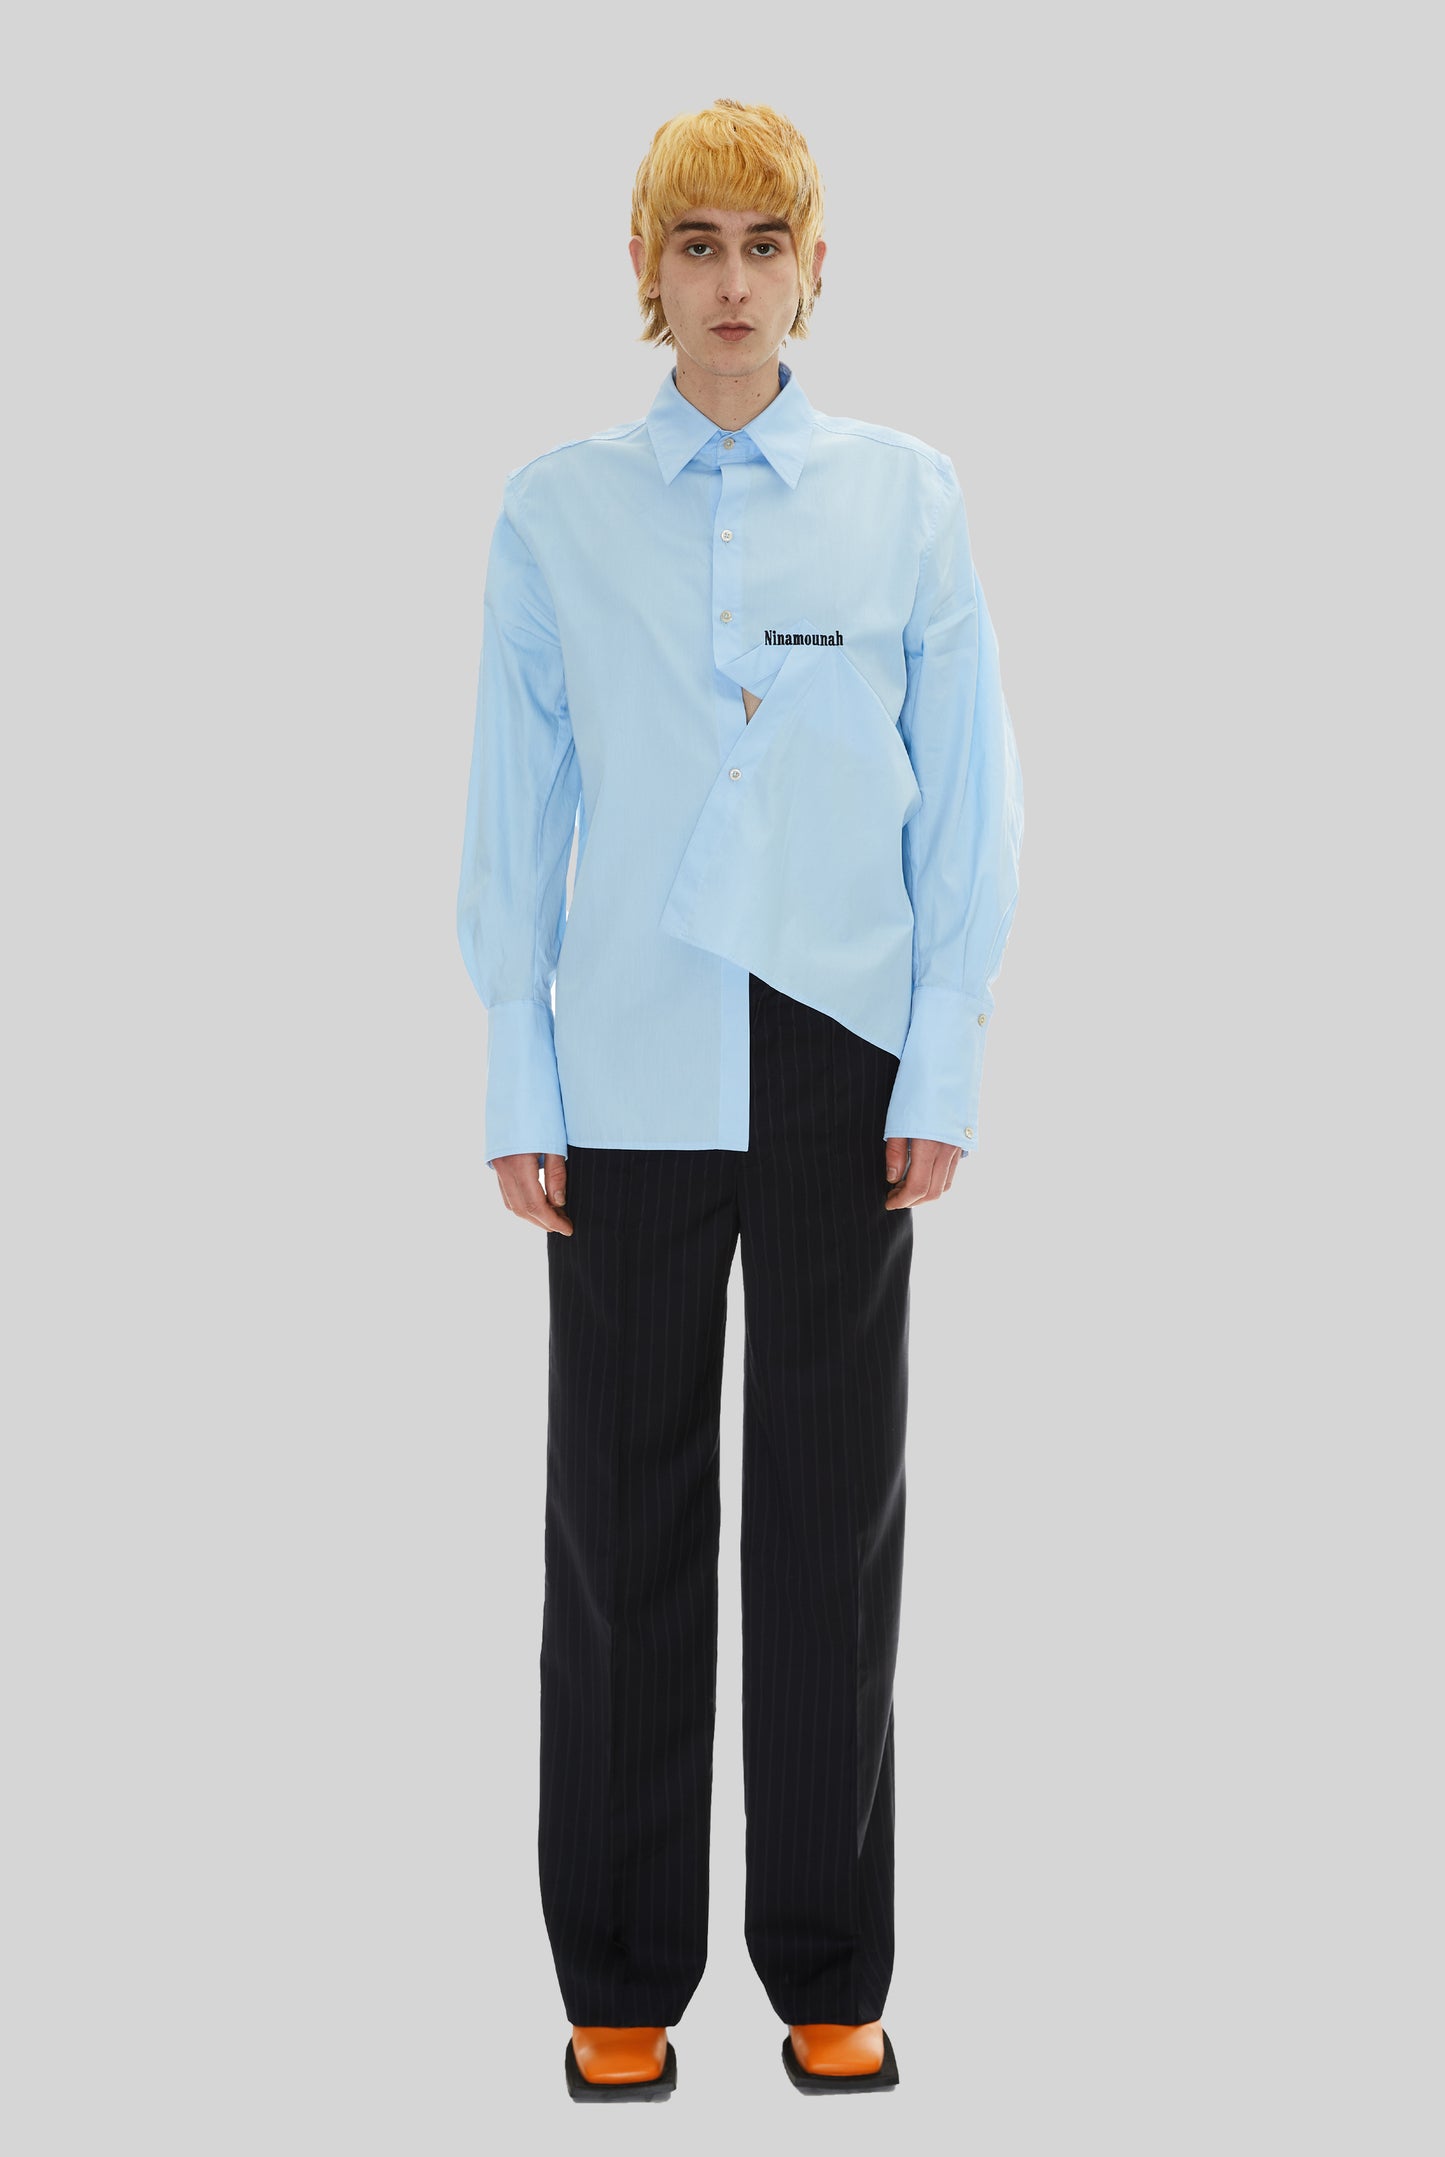 Bandicoot Embroidery Blouse in Office Blue